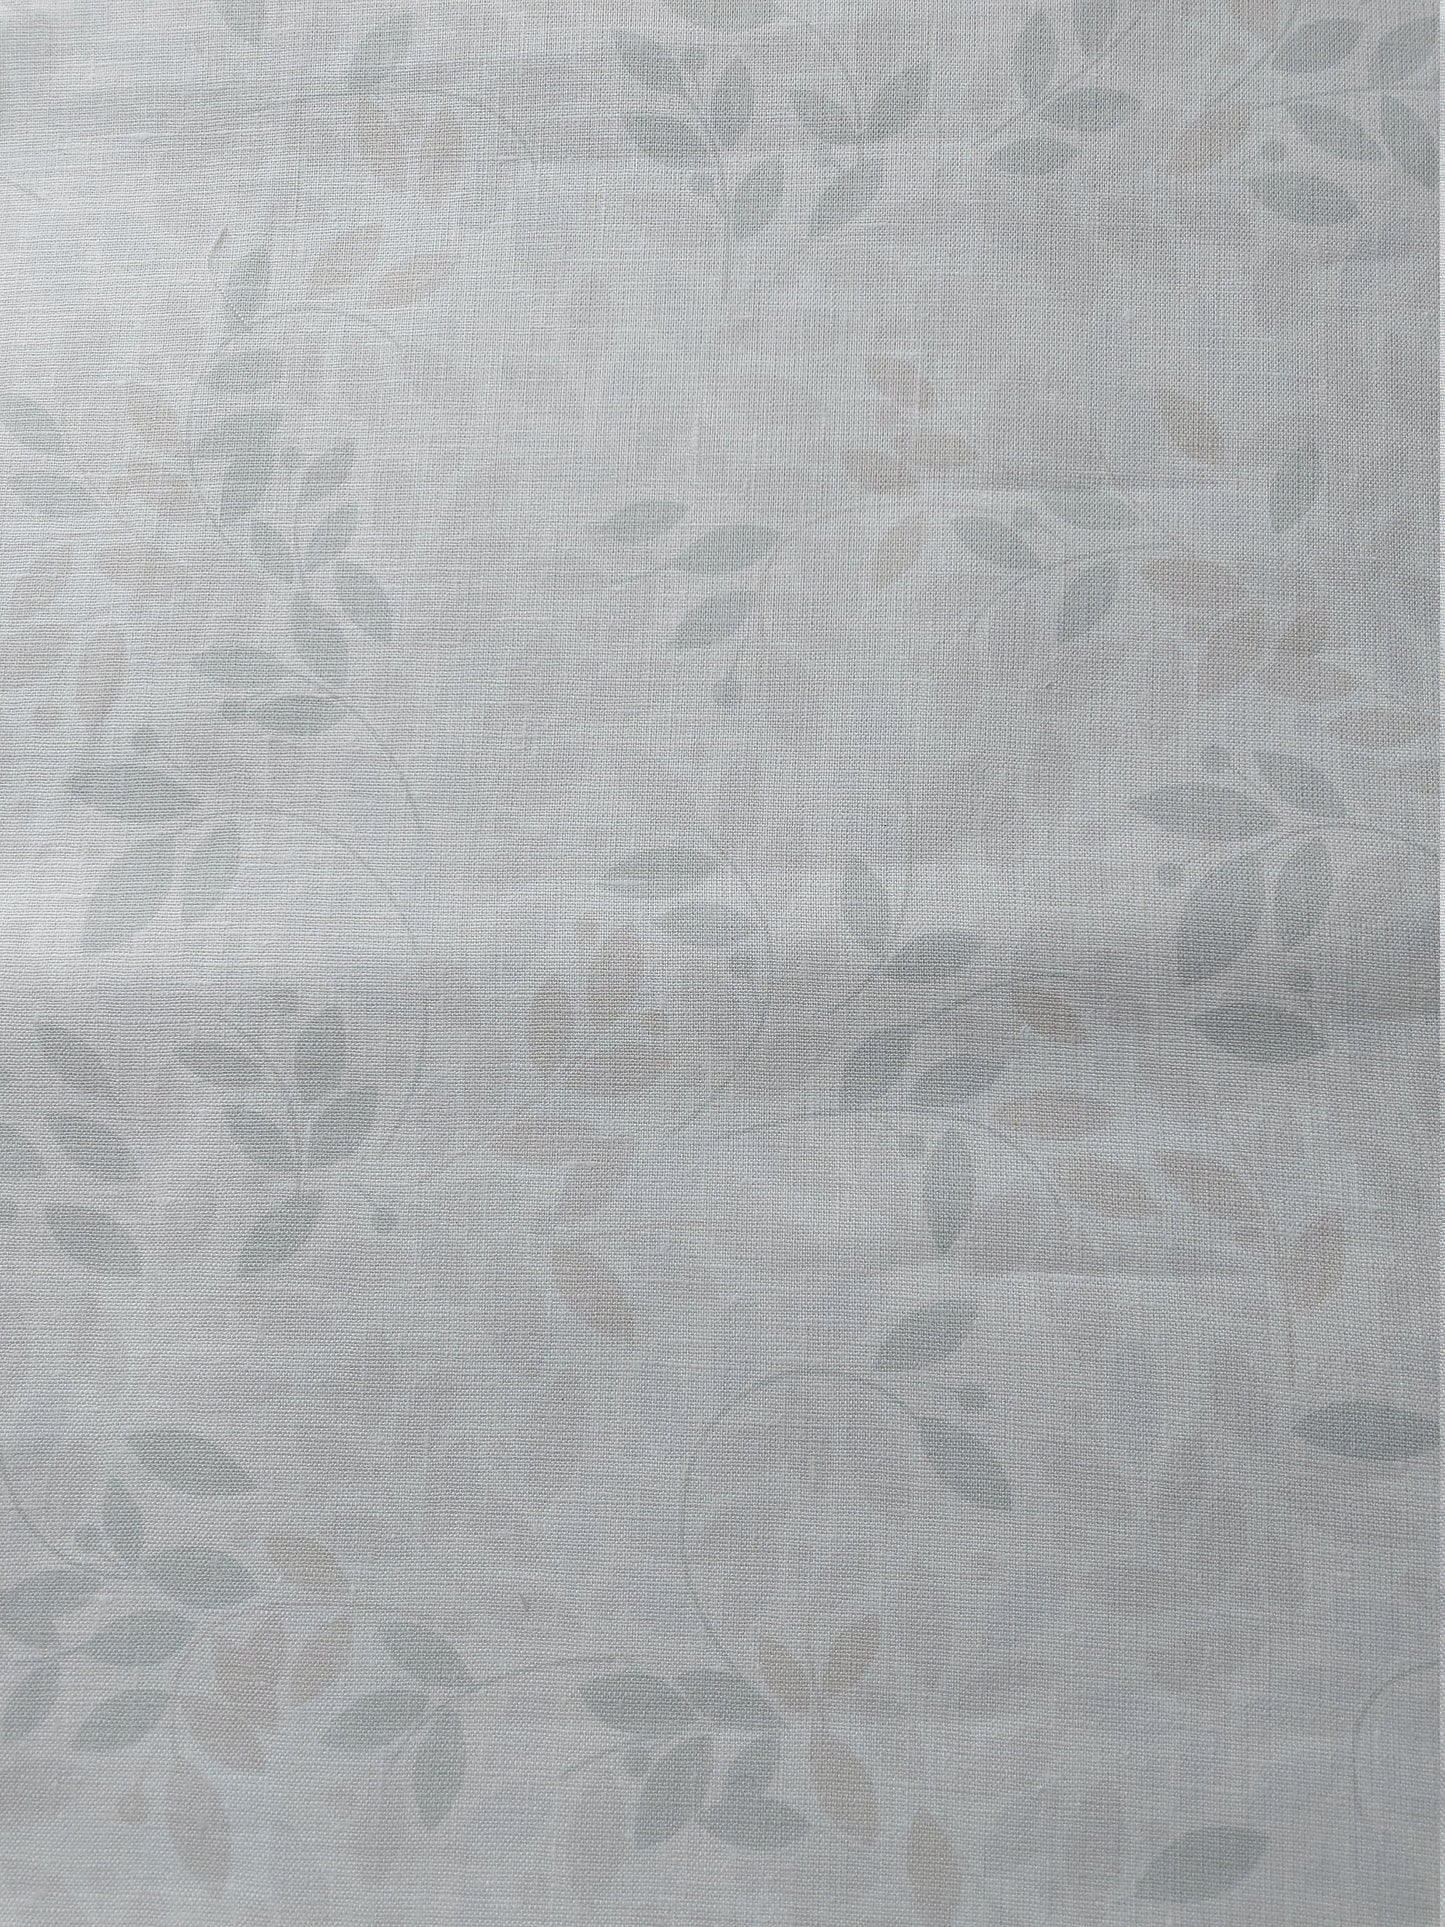 Stonewashed Linen Fabric Natural Printed Linen Fabric By The Yard For Clothing & Home Textile - Width 148 cm/1.62yd